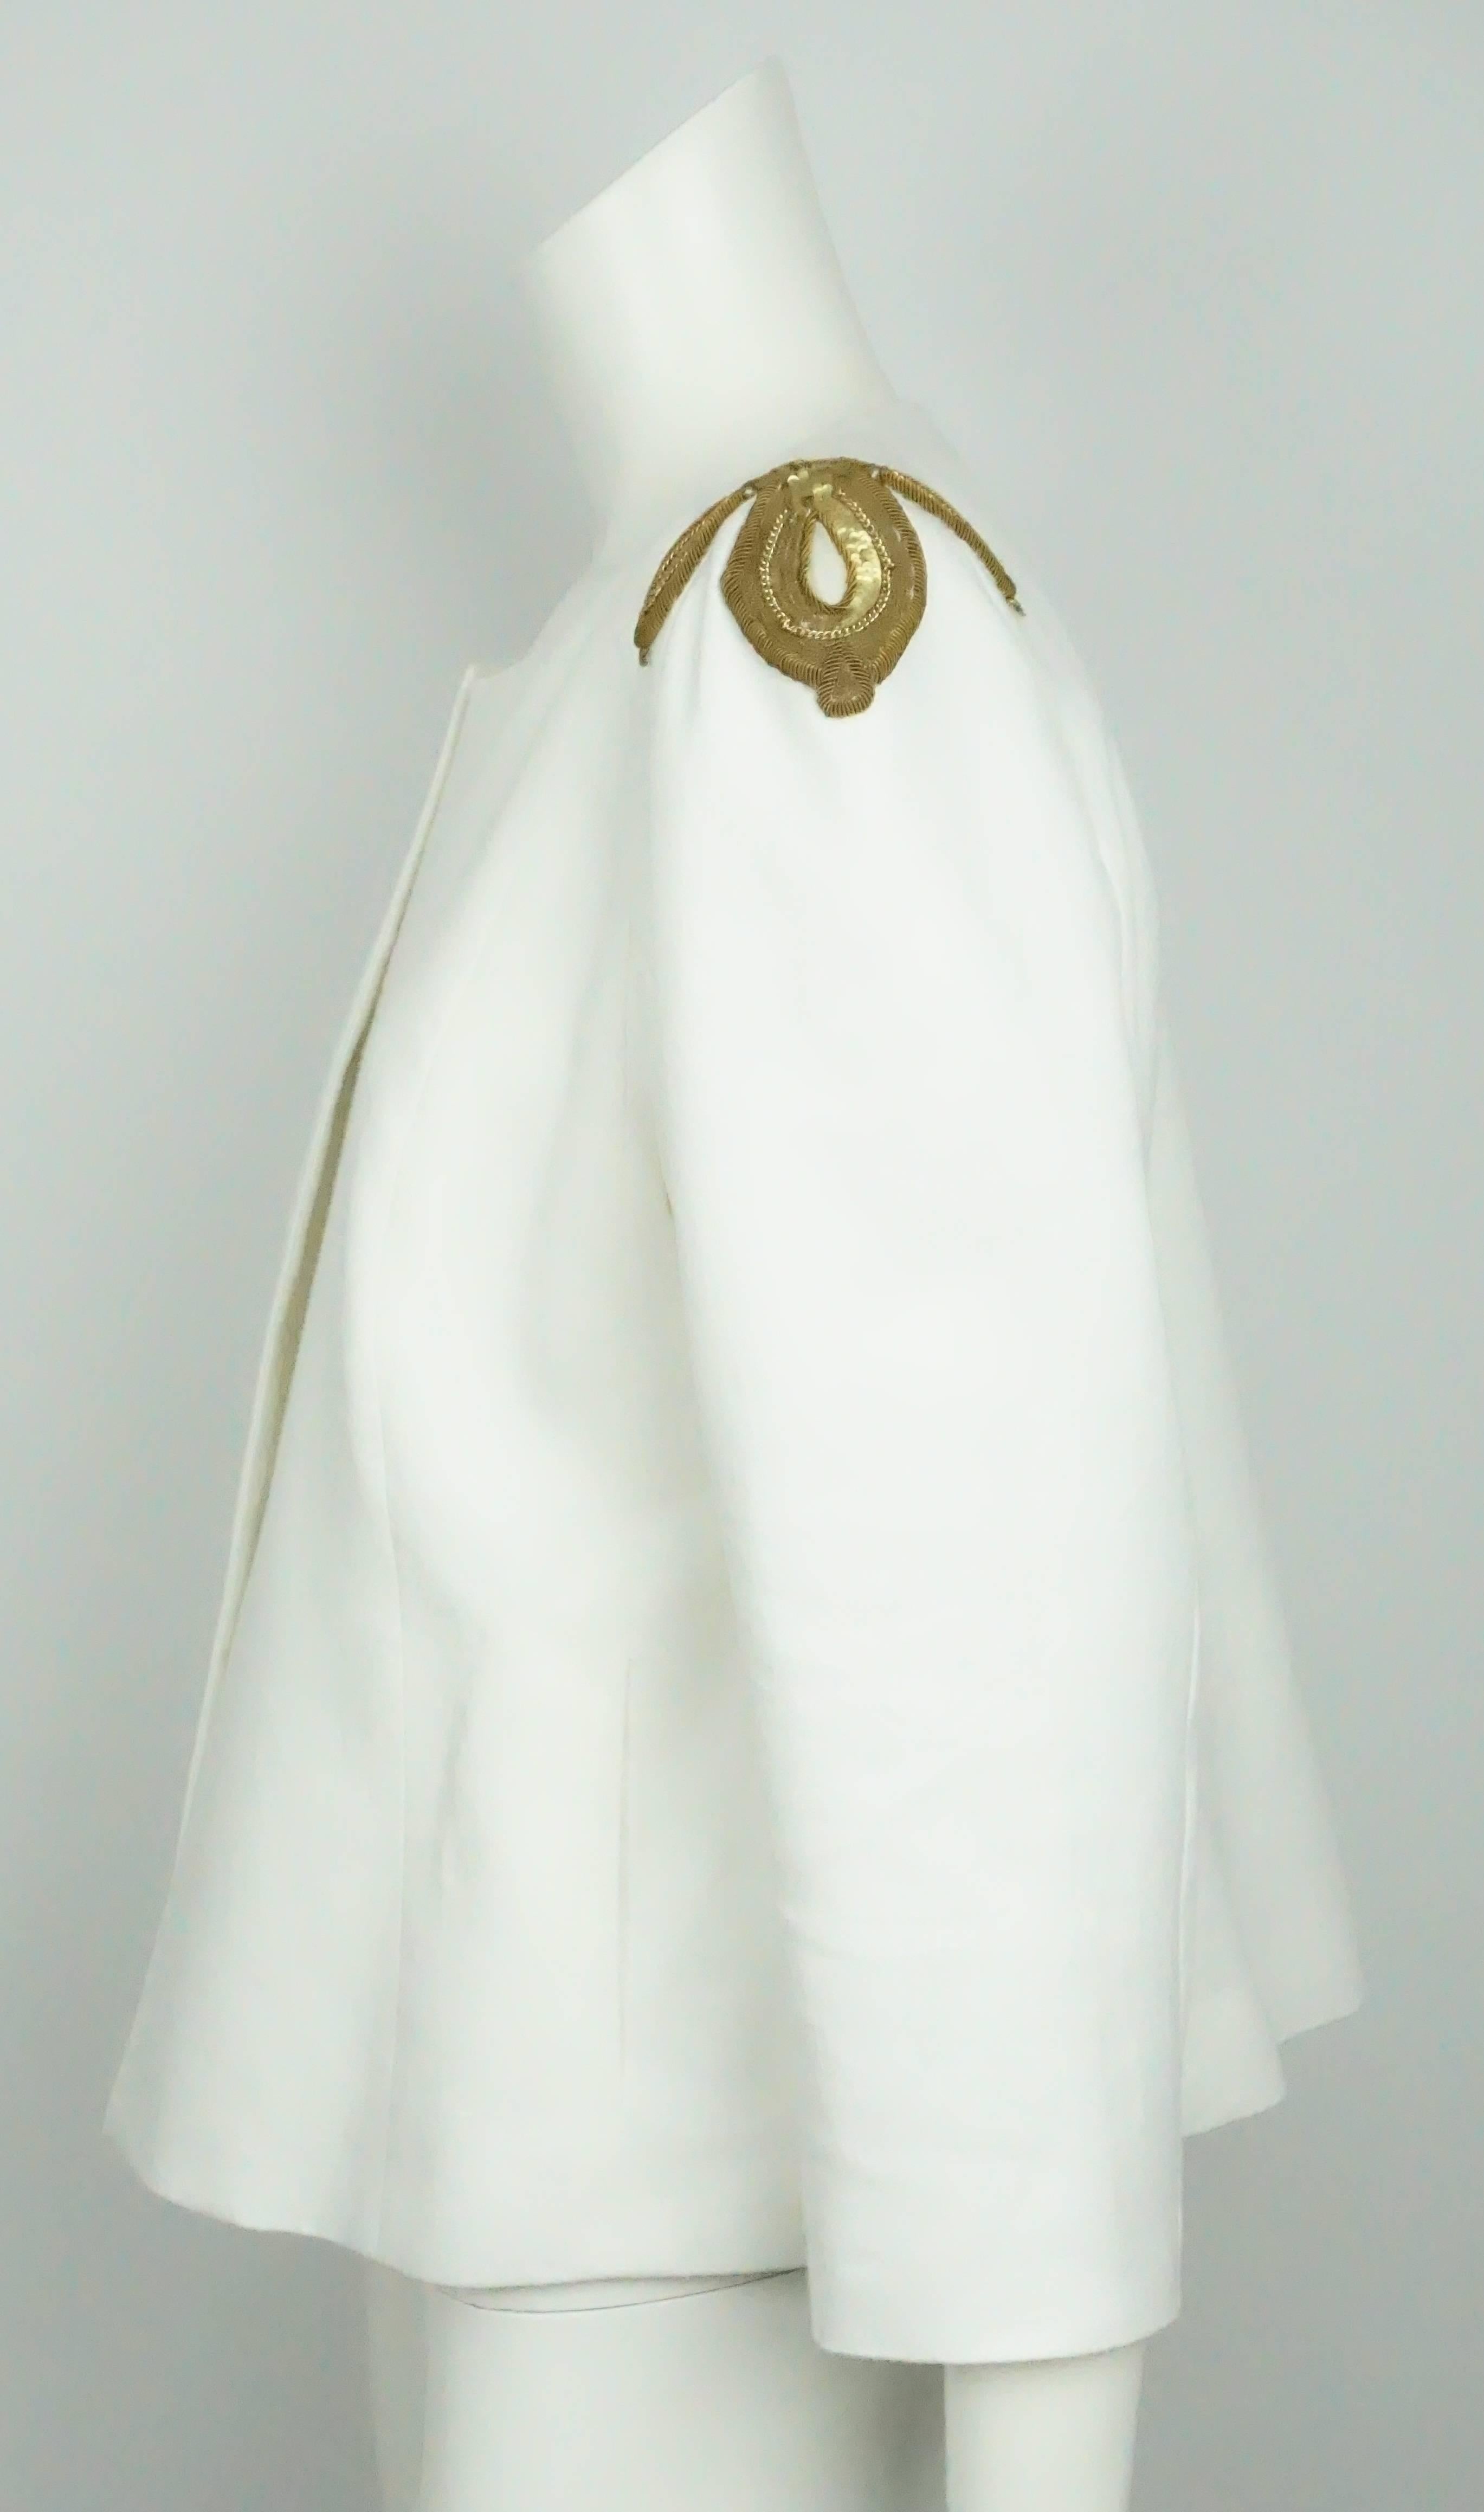 Style Paris White Linen Jacket w/ Gold Sequin Detail On Shoulder - 42 - NWT  This very elegant and classic jacket is a must have for summer. It is fully lined, it has no front closure, gold appliques on the shoulders made of ribbon, metal chain,